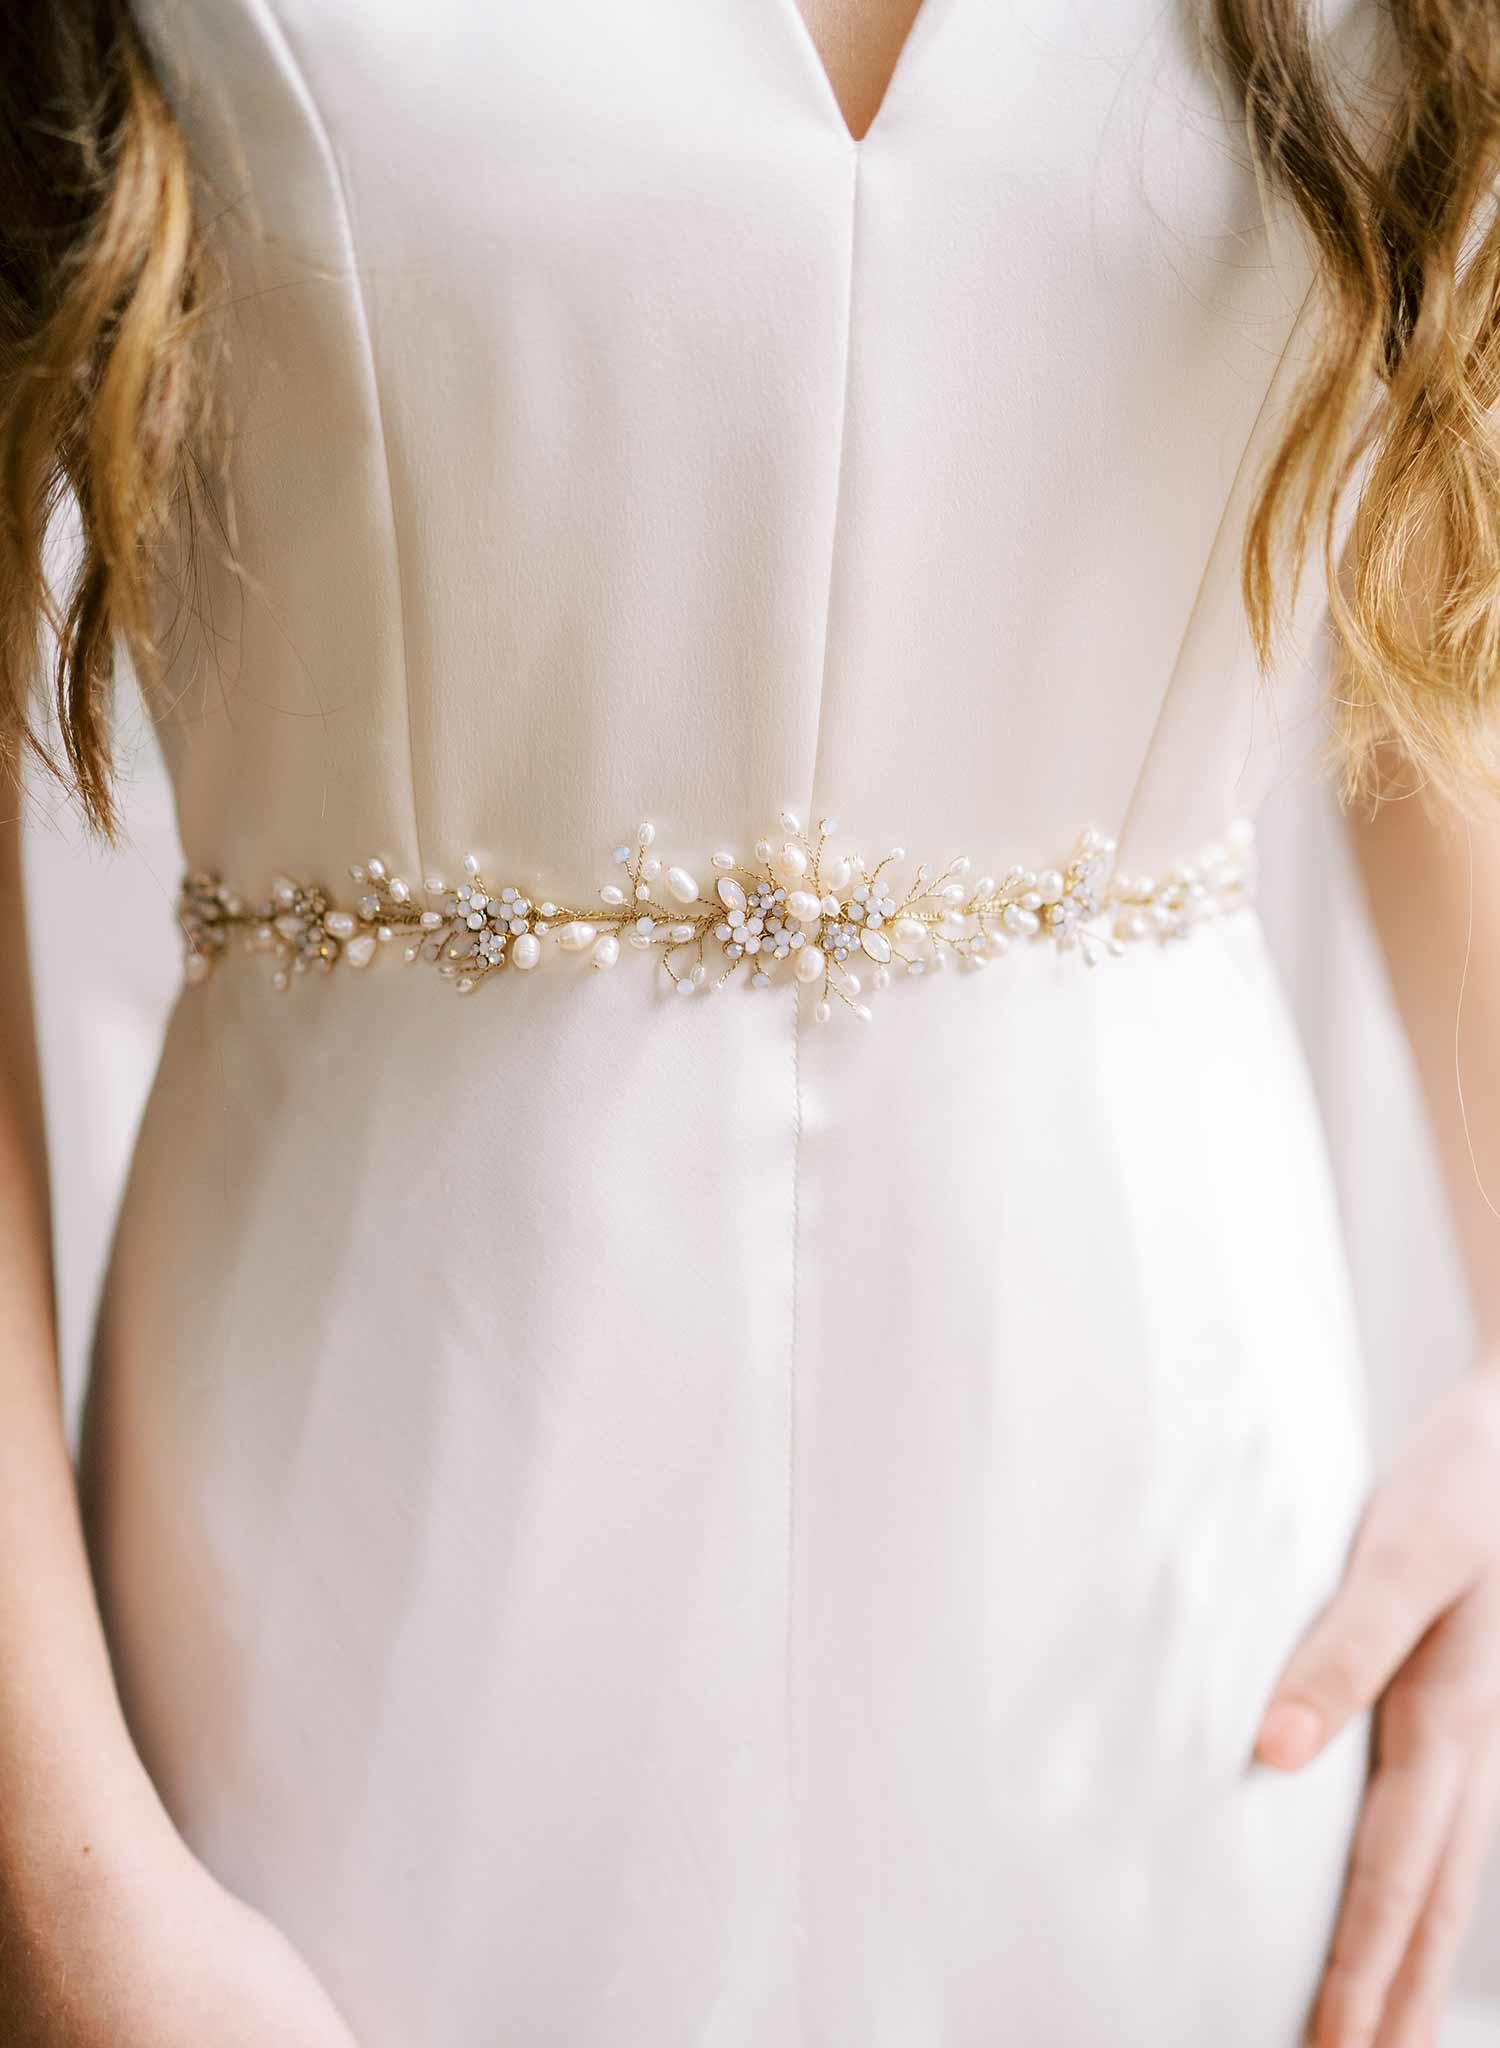 Clustered pearl and opal bridal sash - Style #2480